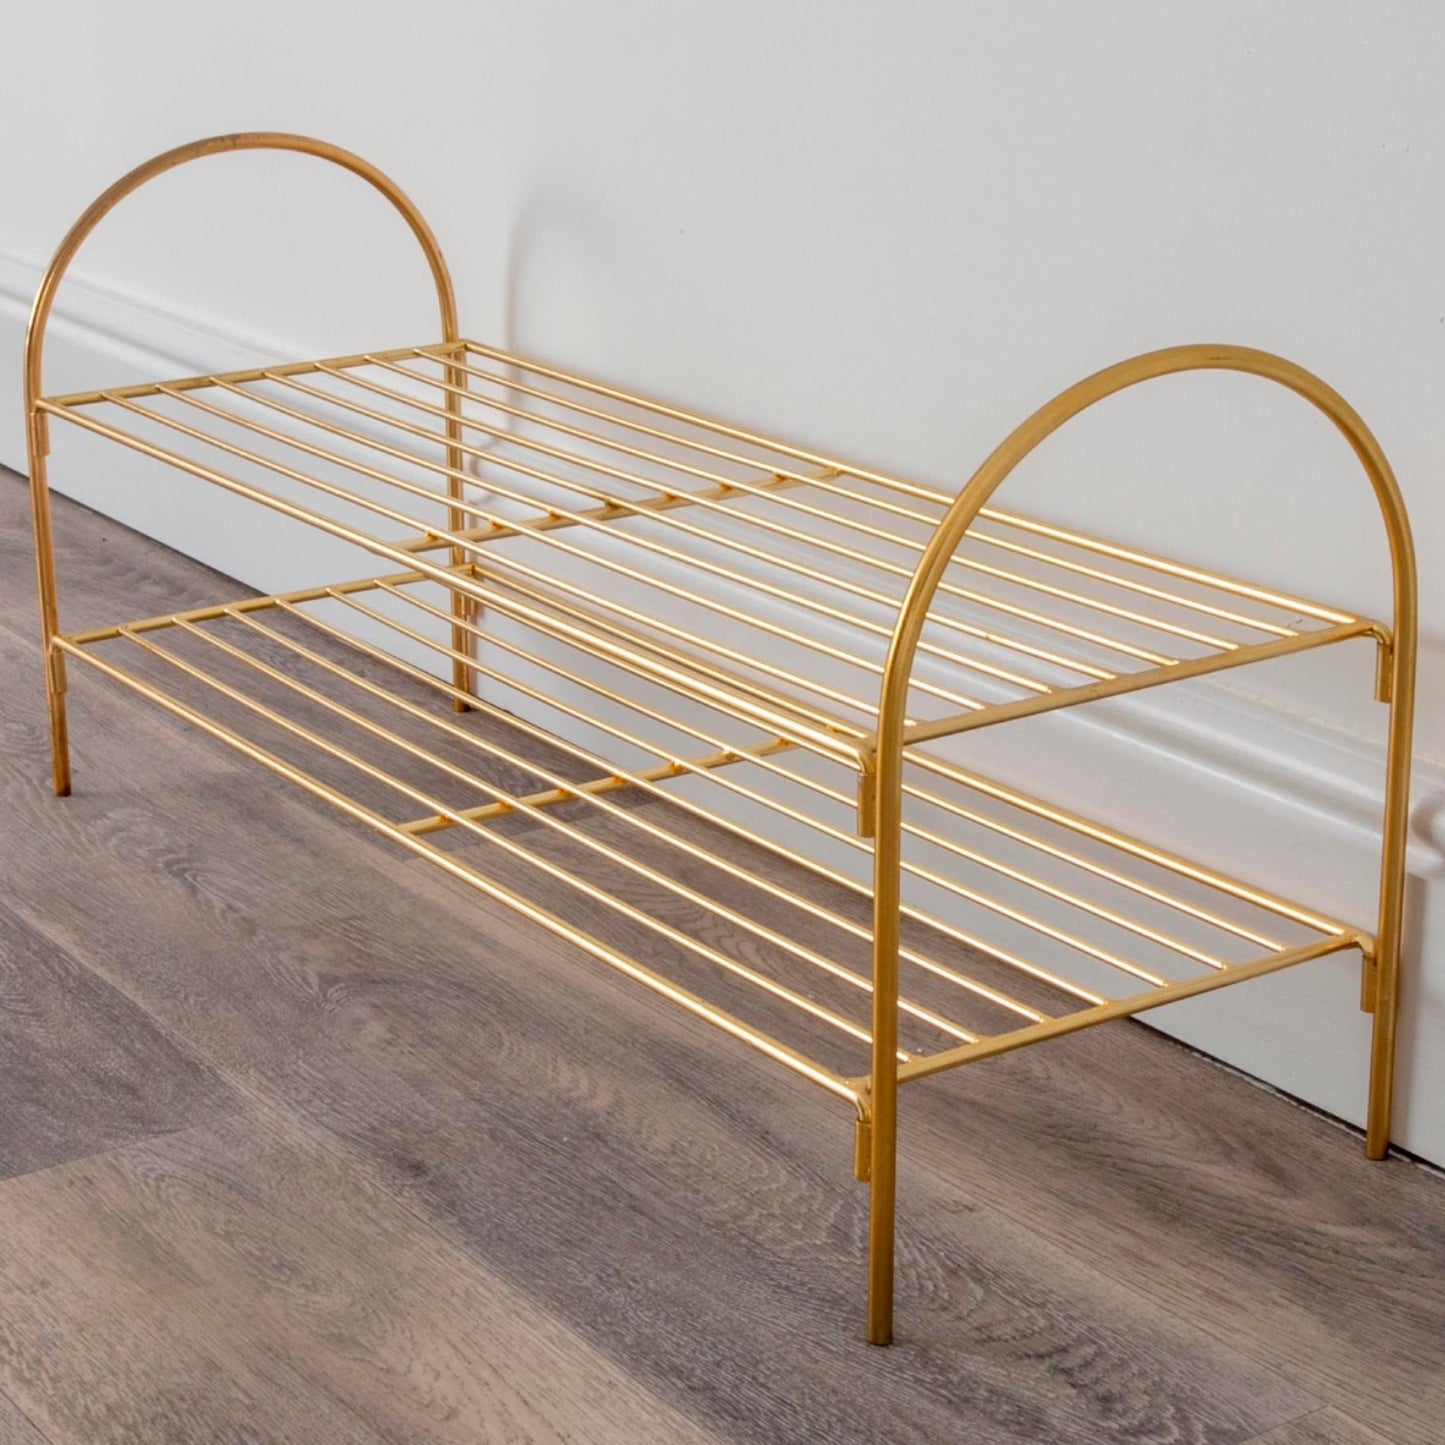 Gold shoe rack by Native